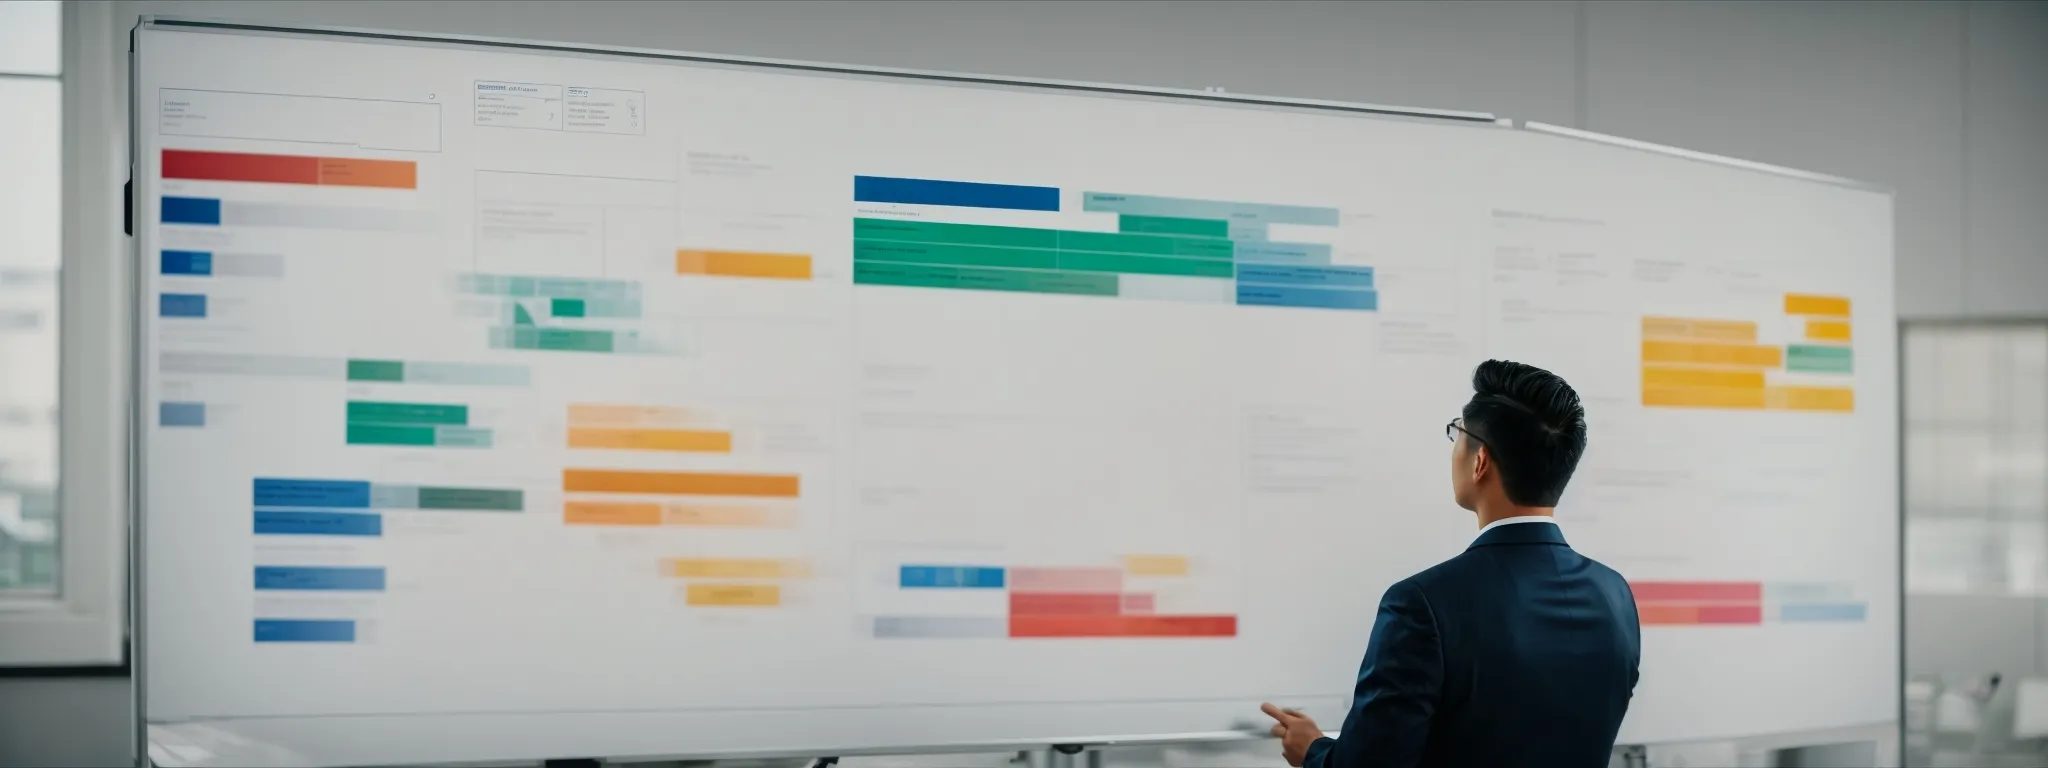 a marketer contemplates a large, color-coded funnel chart on a whiteboard illustrating different stages of customer engagement.